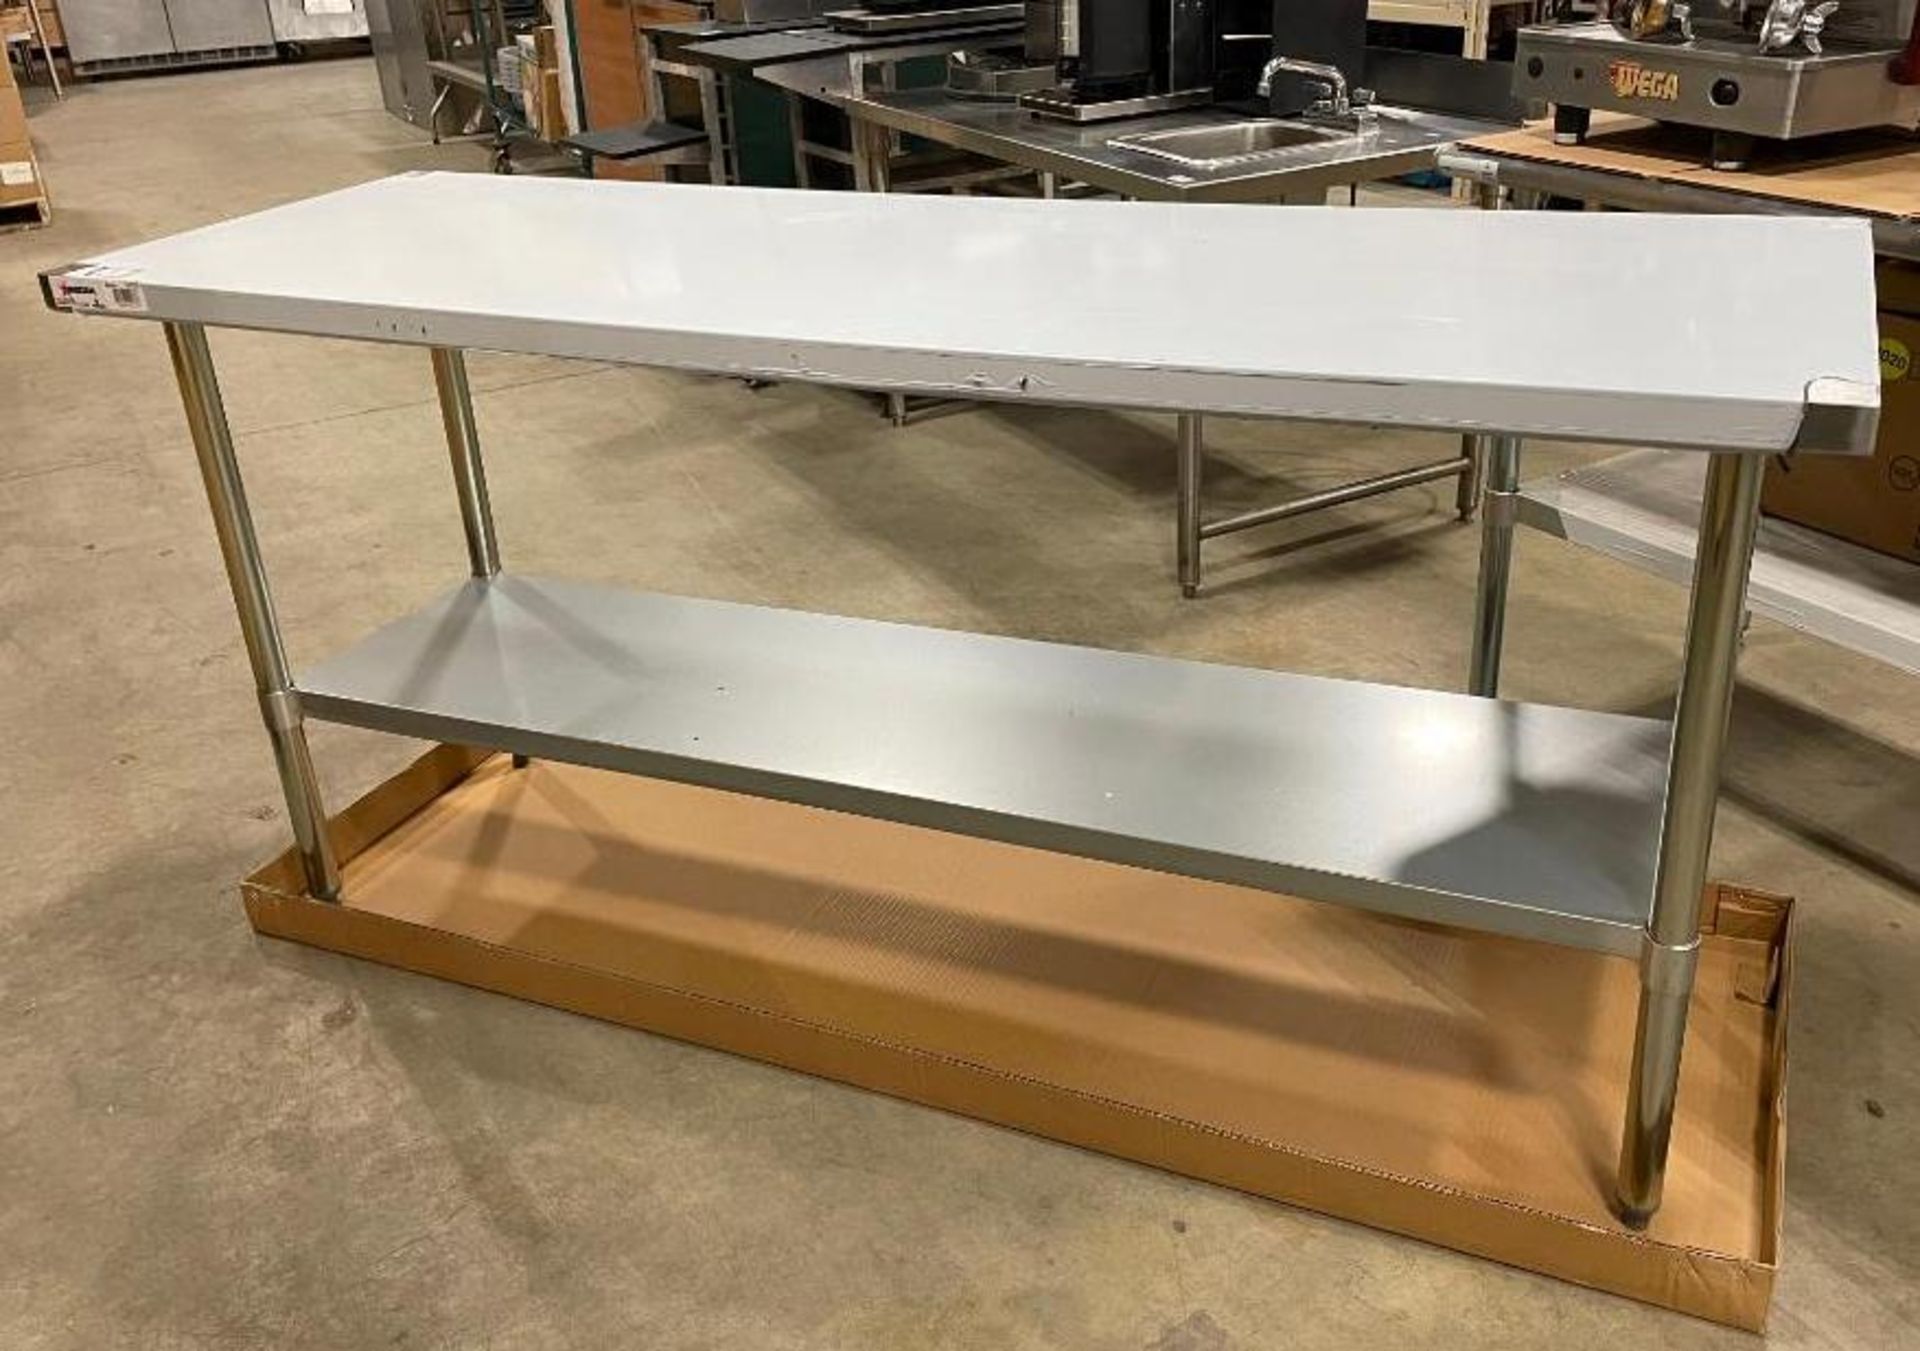 NEW 72" X 24" STAINLESS STEEL WORK TABLE